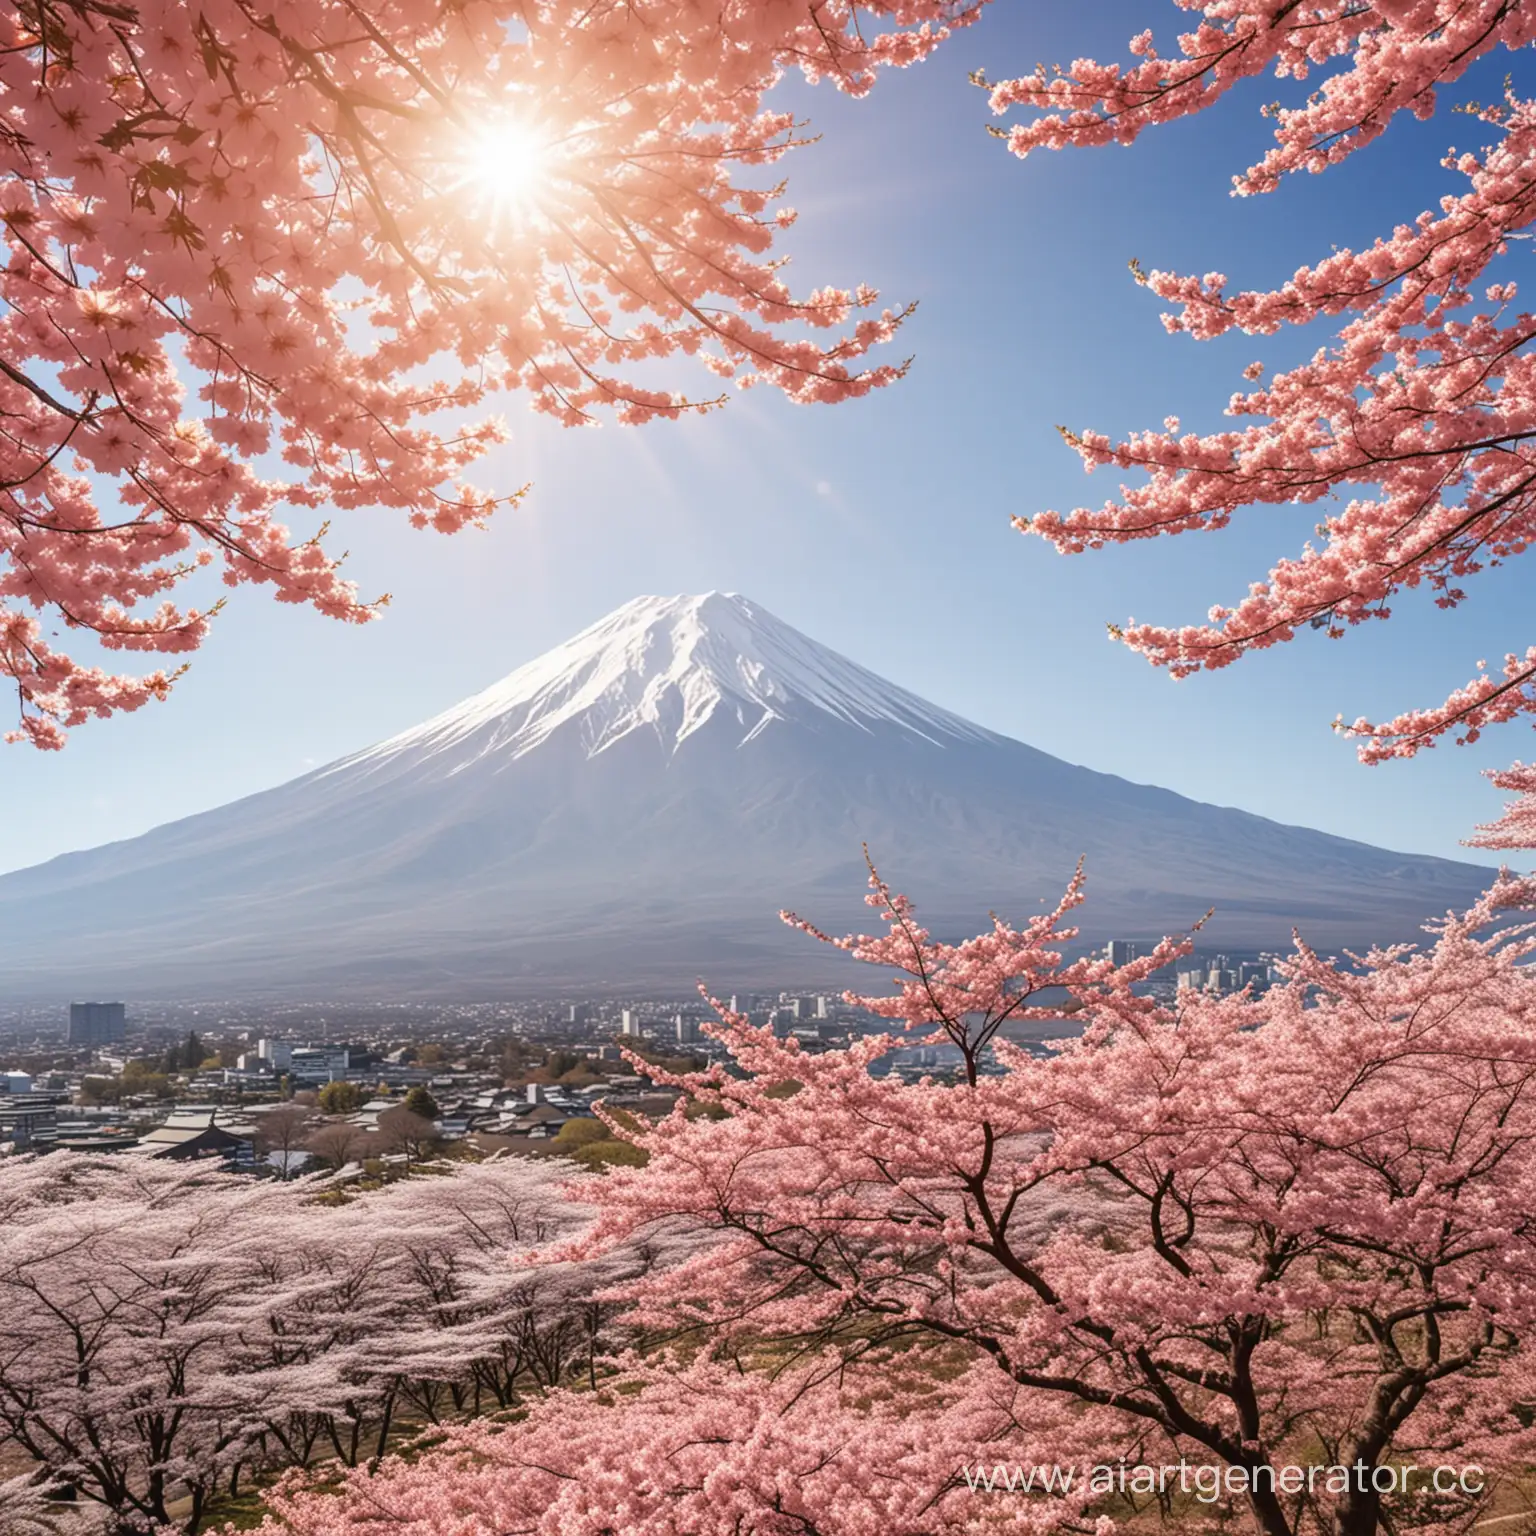 Sunny-Day-in-Japan-Sakura-Tree-Blossoms-with-Mount-Fuji-View